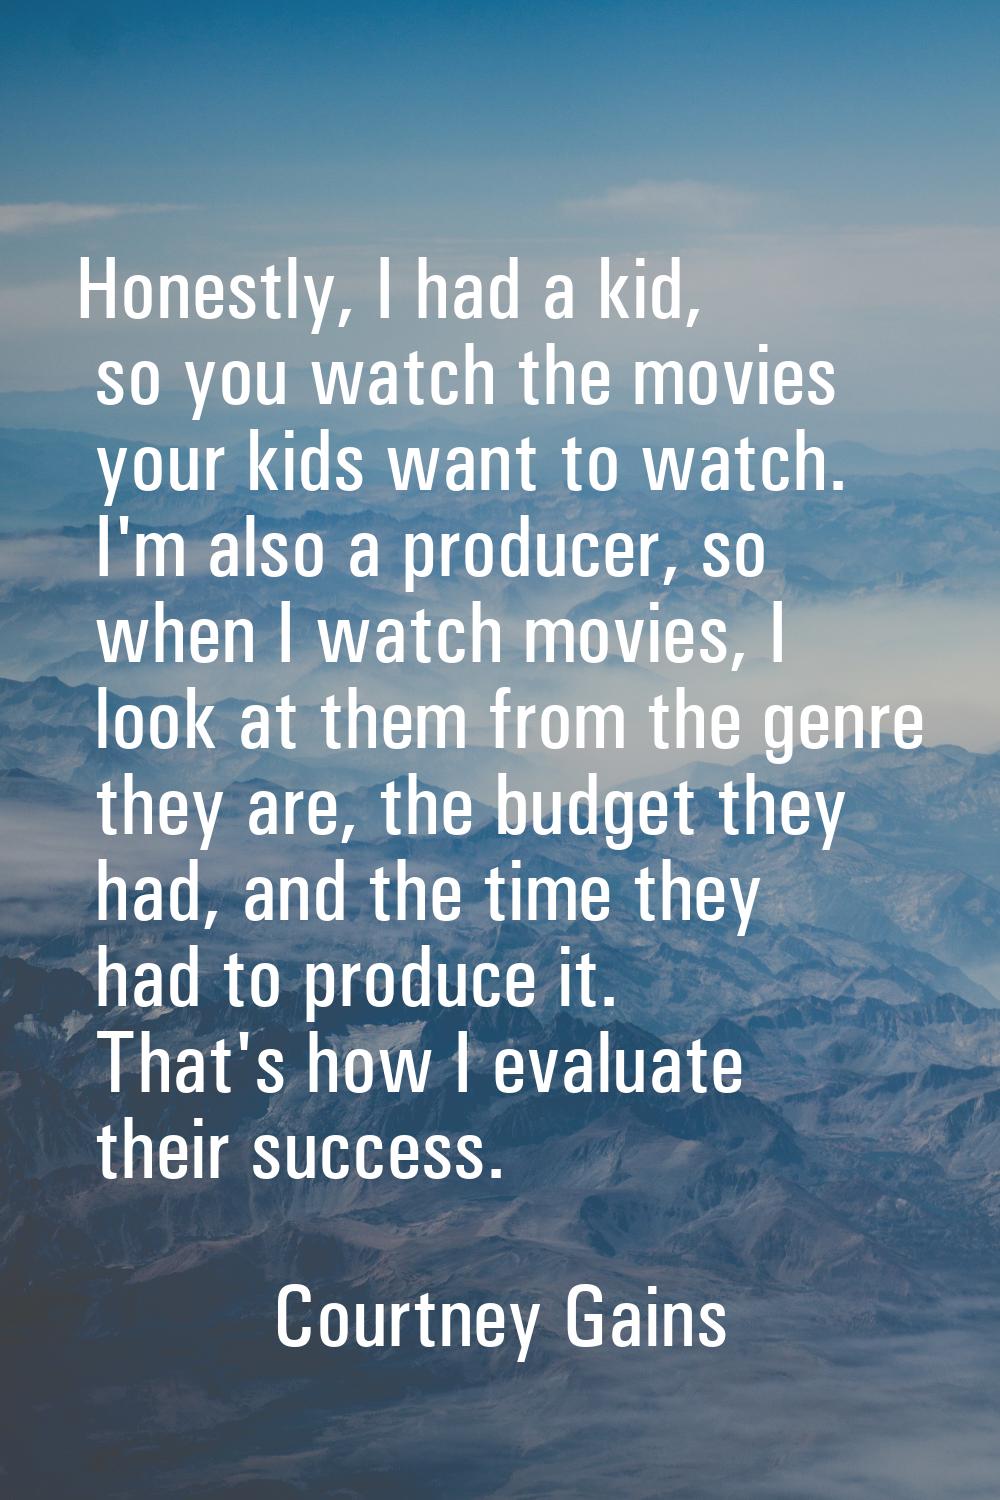 Honestly, I had a kid, so you watch the movies your kids want to watch. I'm also a producer, so whe